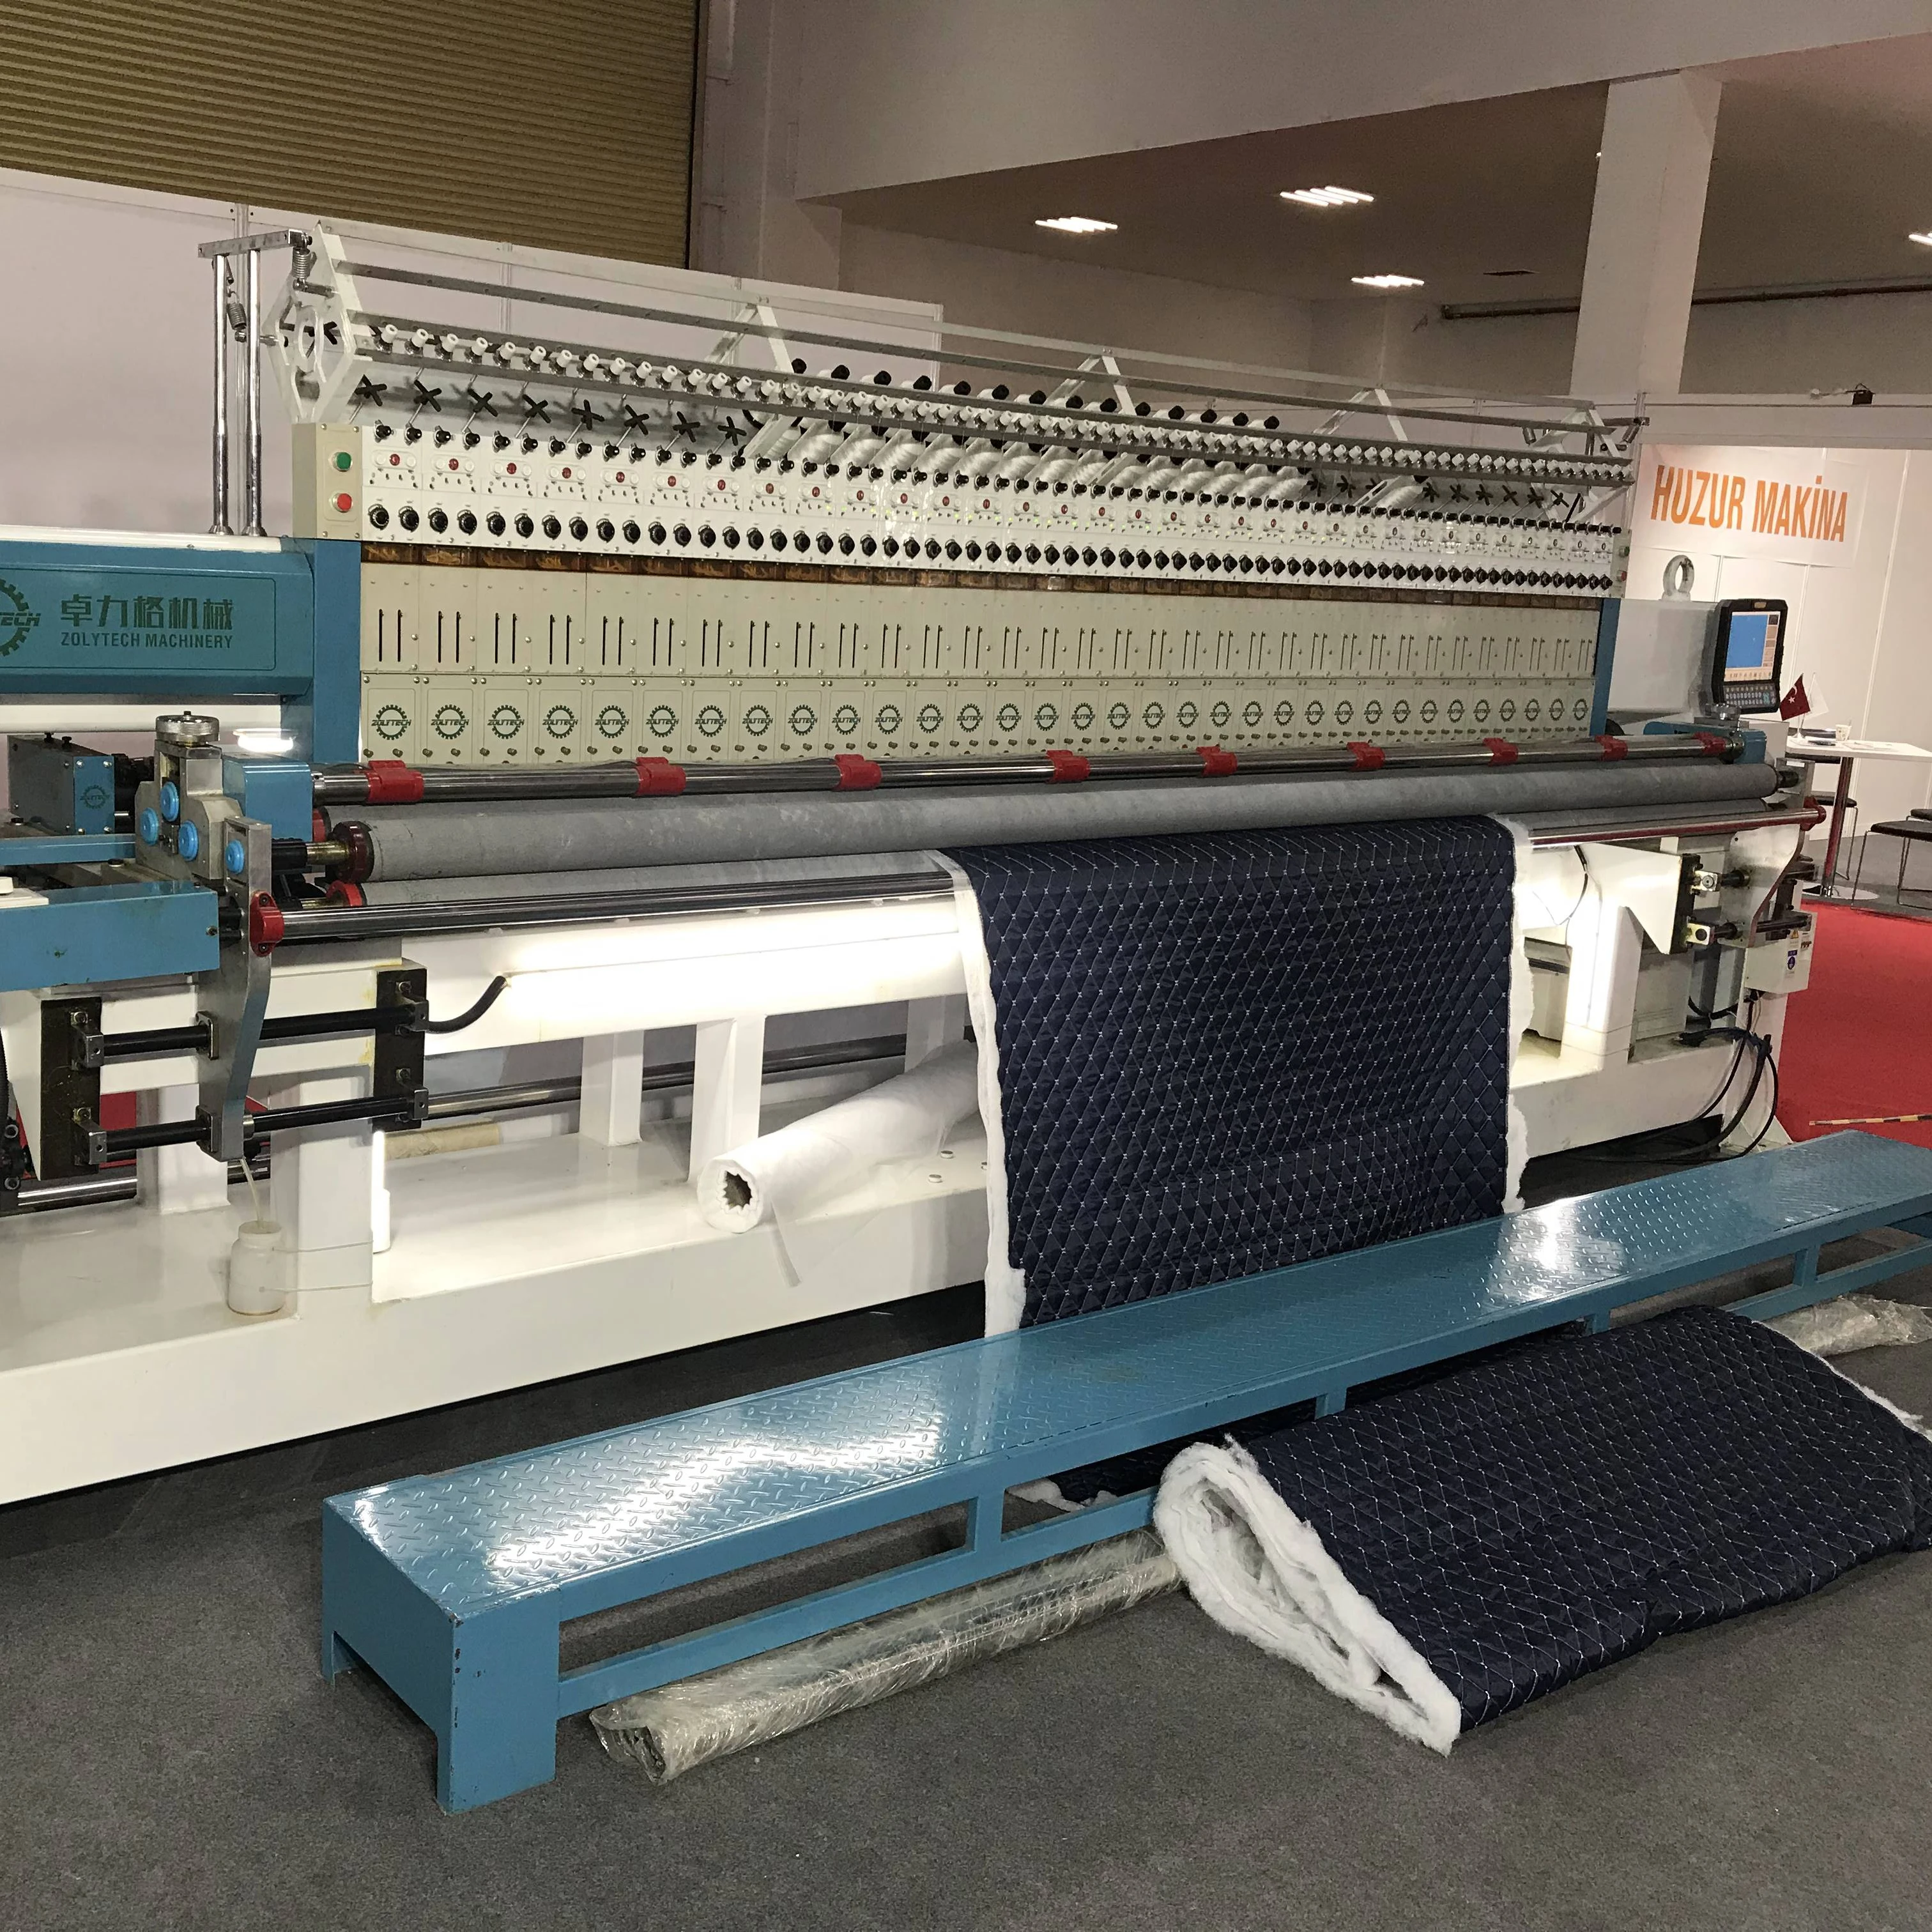 
2020 hot sales High Speed Sectional Quilting Embroidery Machine 